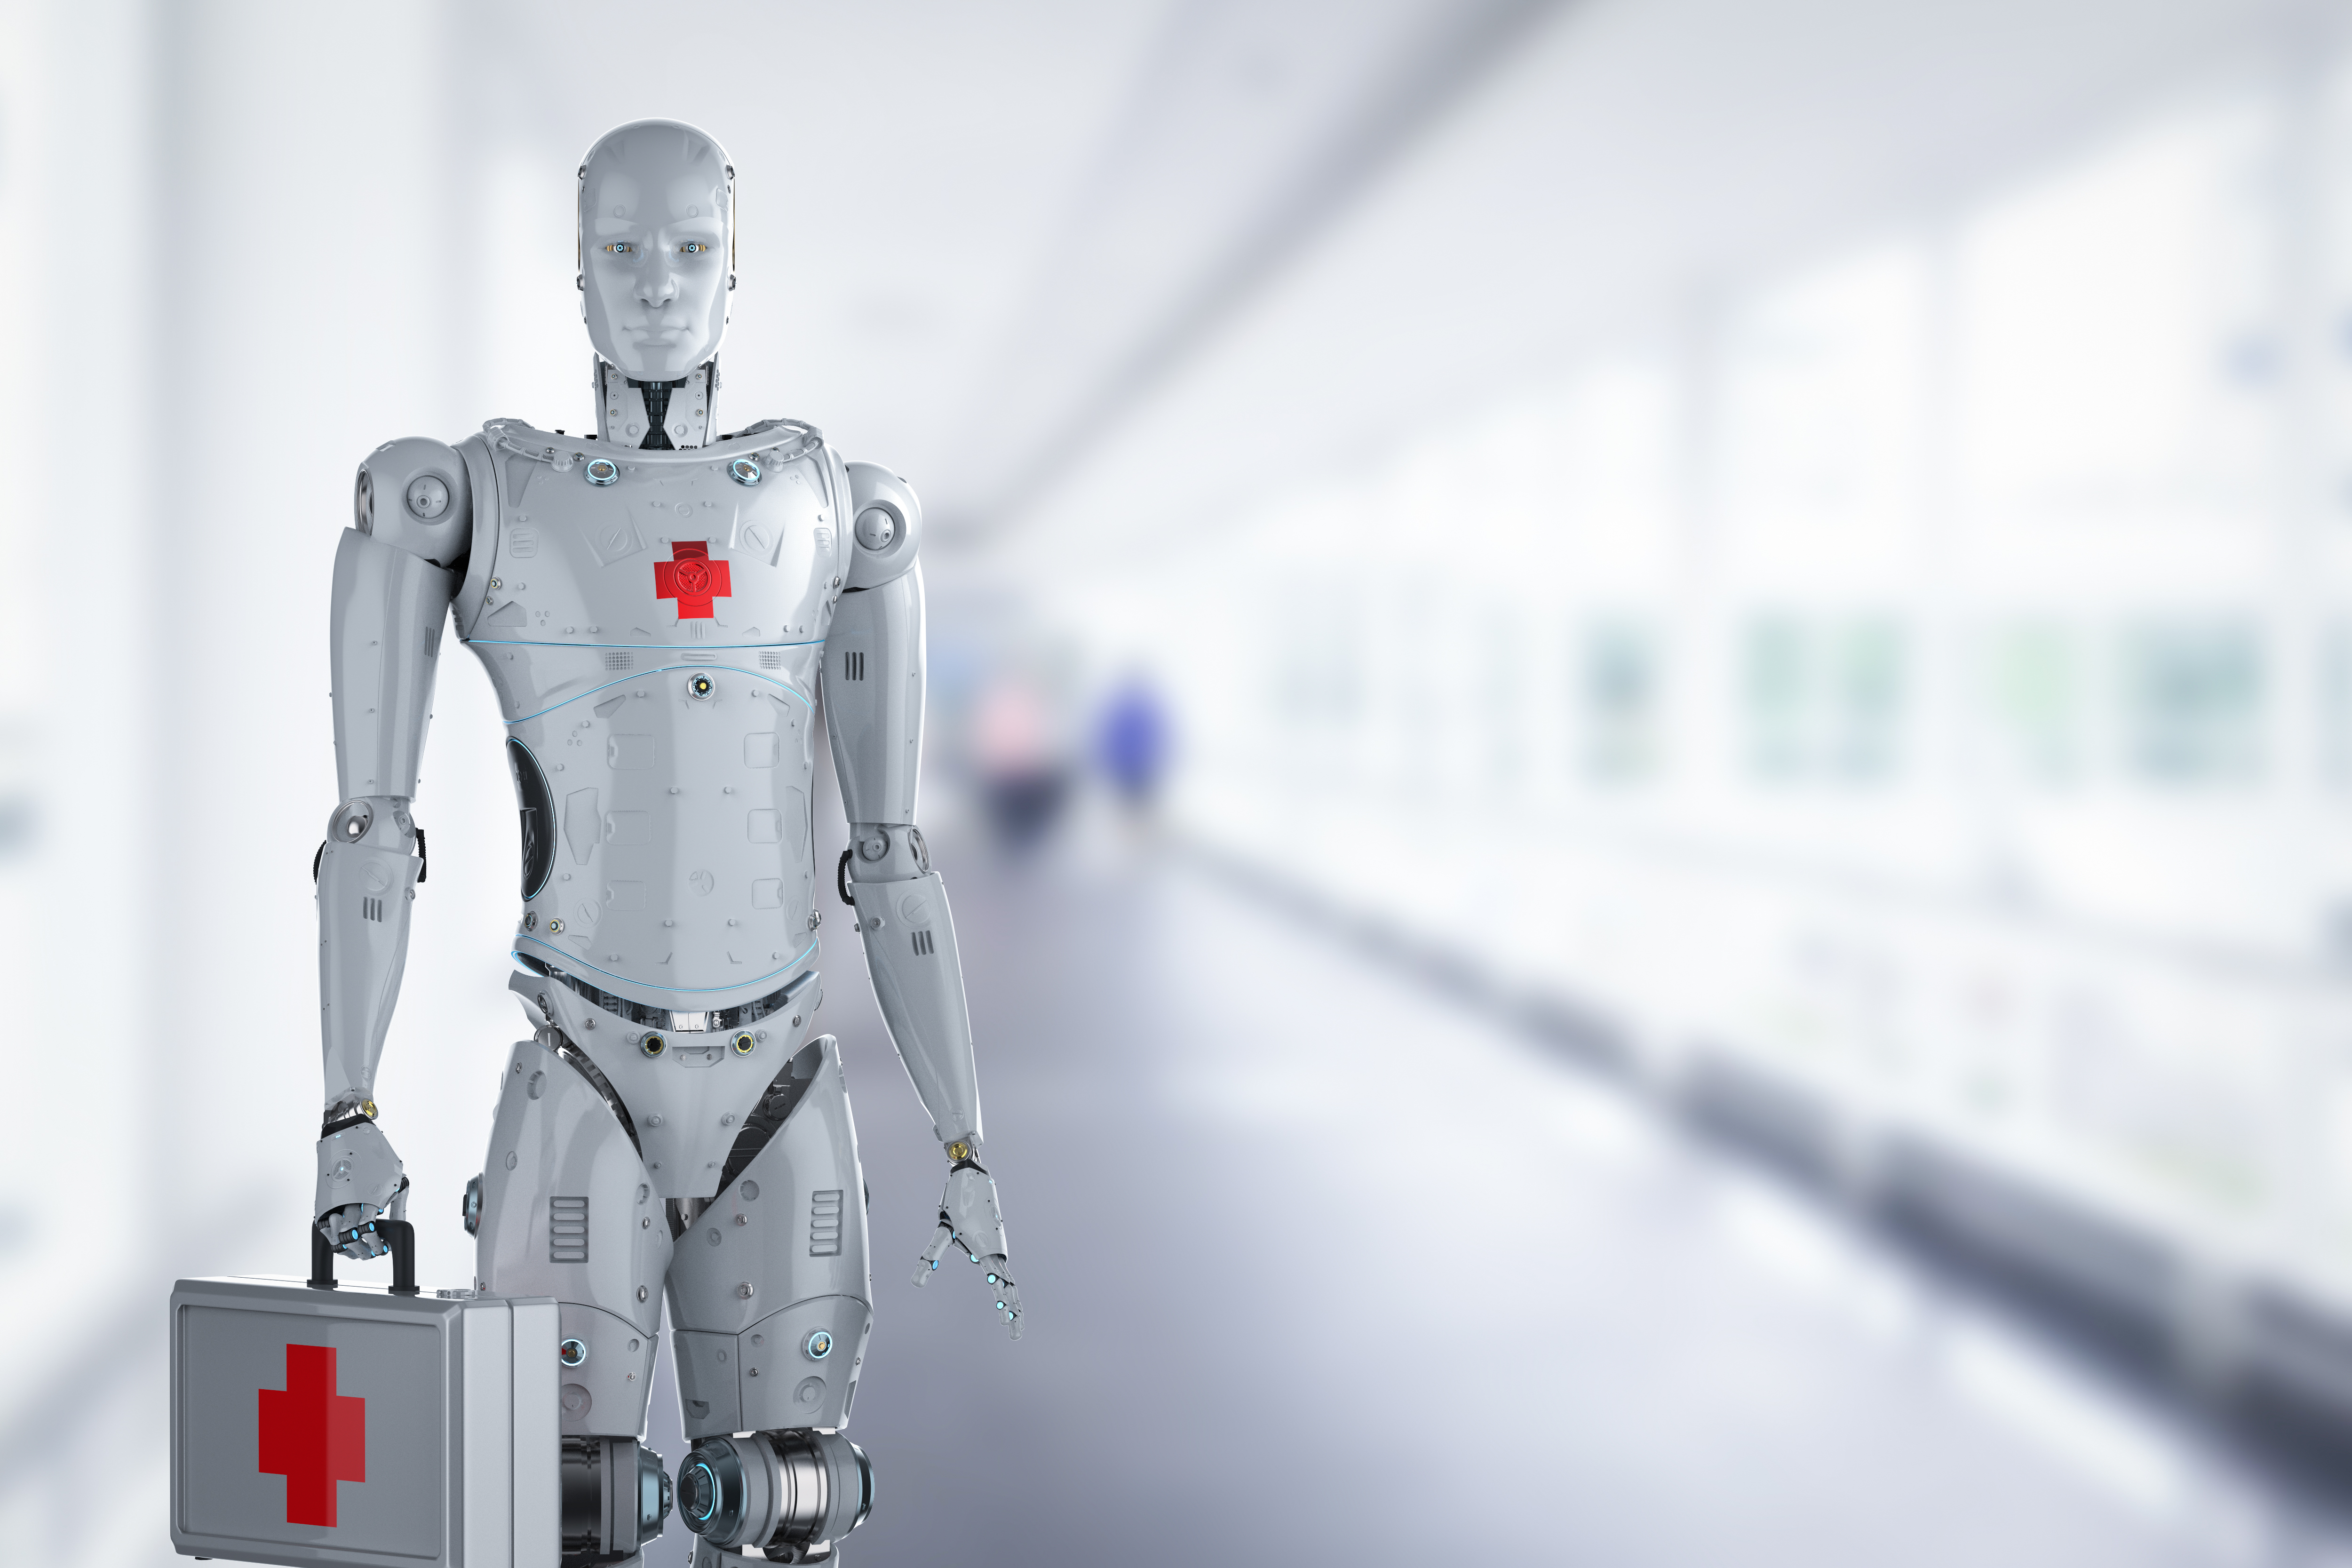 3d-rendering-medical-robot-with-red-cross-sign-holding-medical-case